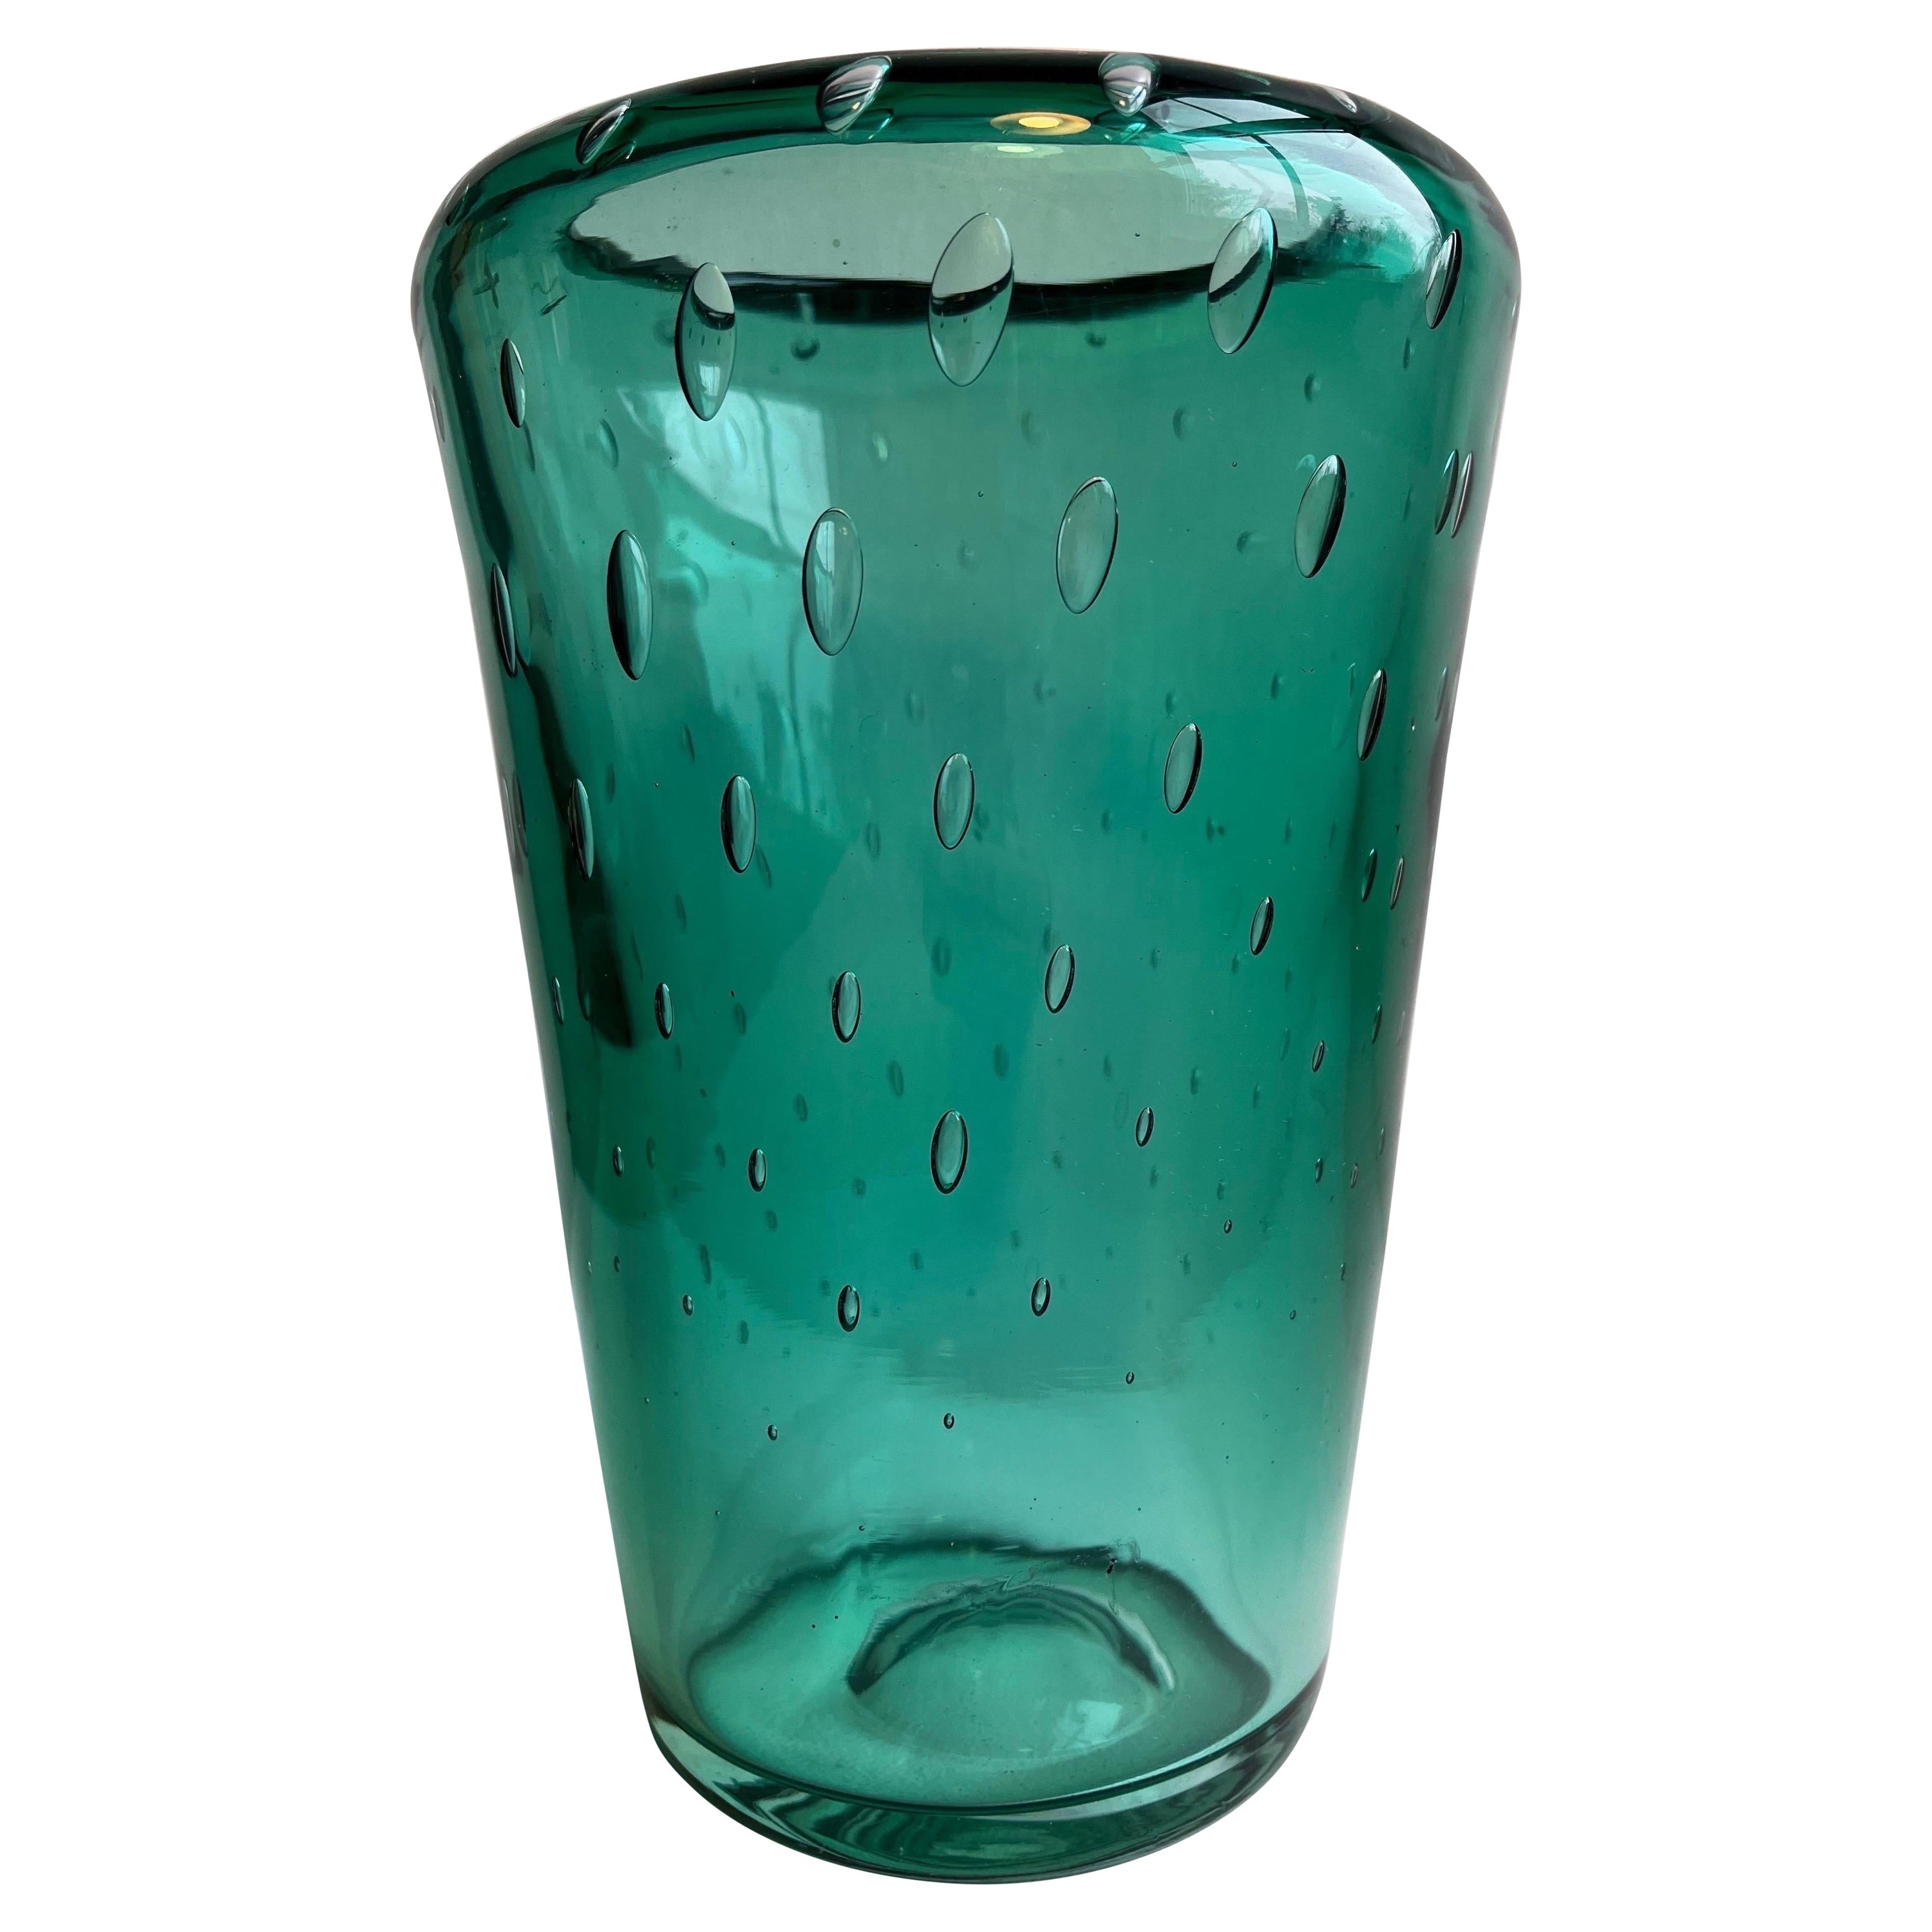 Green Blenko Vase with Air Bubbles, 1950s